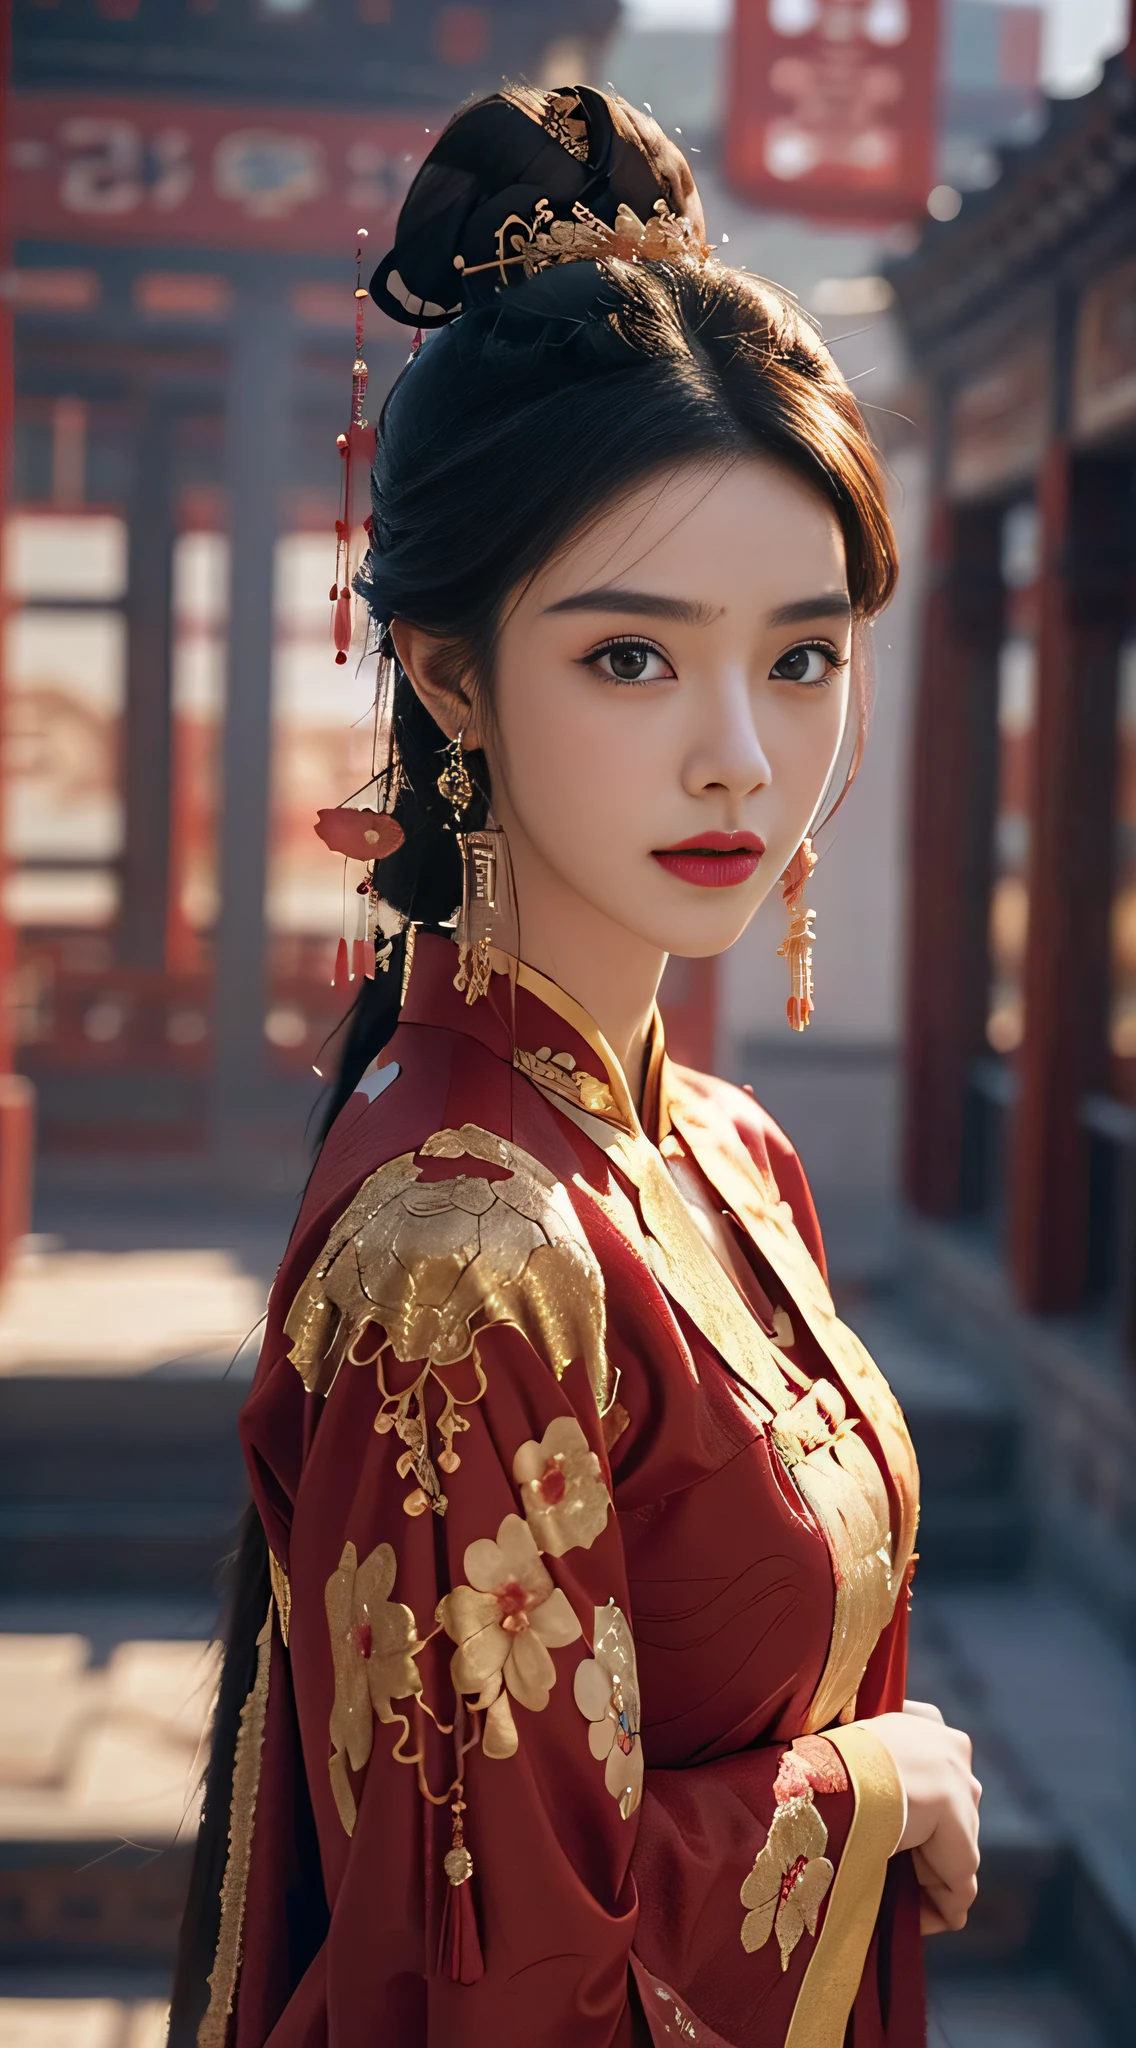 （abstract artistic：1.4）， tmasterpiece， best qualtiy， Ultra-high resolution， big breasts beautiful， Visually stunning， （1girll：1.2）， crimson themed， dark red color， Bleeding red， Halation， looking at viewert
，full bodyesbian，high-heels，woman，nvshen，dunhuang，Hanfu，Red and gold dress,（tmasterpiece，top Quority，best qualtiy，offcial art，Beauty and aesthetics：1.2），Charming mature woman，The is very detailed，（s fractal art：1.1），（a color：1.1）（blossoms：1.3），Most detailed，（ zentangle:1.2), (Dynamic pose), (abstract backgrounds:1.3), (Chinese Traditional Cloth:1.2), (Shiny skin), (many color:1.4), ,(Earrings:1.4),（（fashion icon|Fashionistas|1 Fashionista（individually）|trendsetter|Mannequin）），Ancient Chinese clothing， full bodyesbian， rays of sunshine， Clear face，((best qualtiy)), ((tmasterpiece)), (the detail:1.4), hdr（HighDynamicRange）,Ray traching,nvidia RTX,Hyper-Resolution,Unreal 5,Subsurface scattering、PBR Texture、post-proces、Anisotropy Filtering、((Best quality)), ((Masterpiece)), (Highly detailed:1.3),Masterpiece, Best quality, Translucent skin, （tmasterpiece，best qualtiy，realisticlying：1.37），（Complex and sophisticated，Highly detailed skin and face），（Complex and sophisticated，high detailed hand）， Clear face， tmasterpiece， super detailing， Epic composition， hyper HD， high qulity， extremely detaile， offcial art， Uniform 8K wallpaper， super detailing，High resolution CG，depth of fieldaximum definition and sharpnesany-Layer Textures、Albedo and Specular maps、Surface coloring、Accurate simulation of light-material interactions、rendering by octane、Two-colored light、largeaperture、Low ISO、White balance、the rule of thirds、8K raw data，Little ass，,long leges,Little ass,Indifferent eyes,Realistic art,Dominatrix,femdom,high ponytails，high and cold，A look of contempt，180cm tall